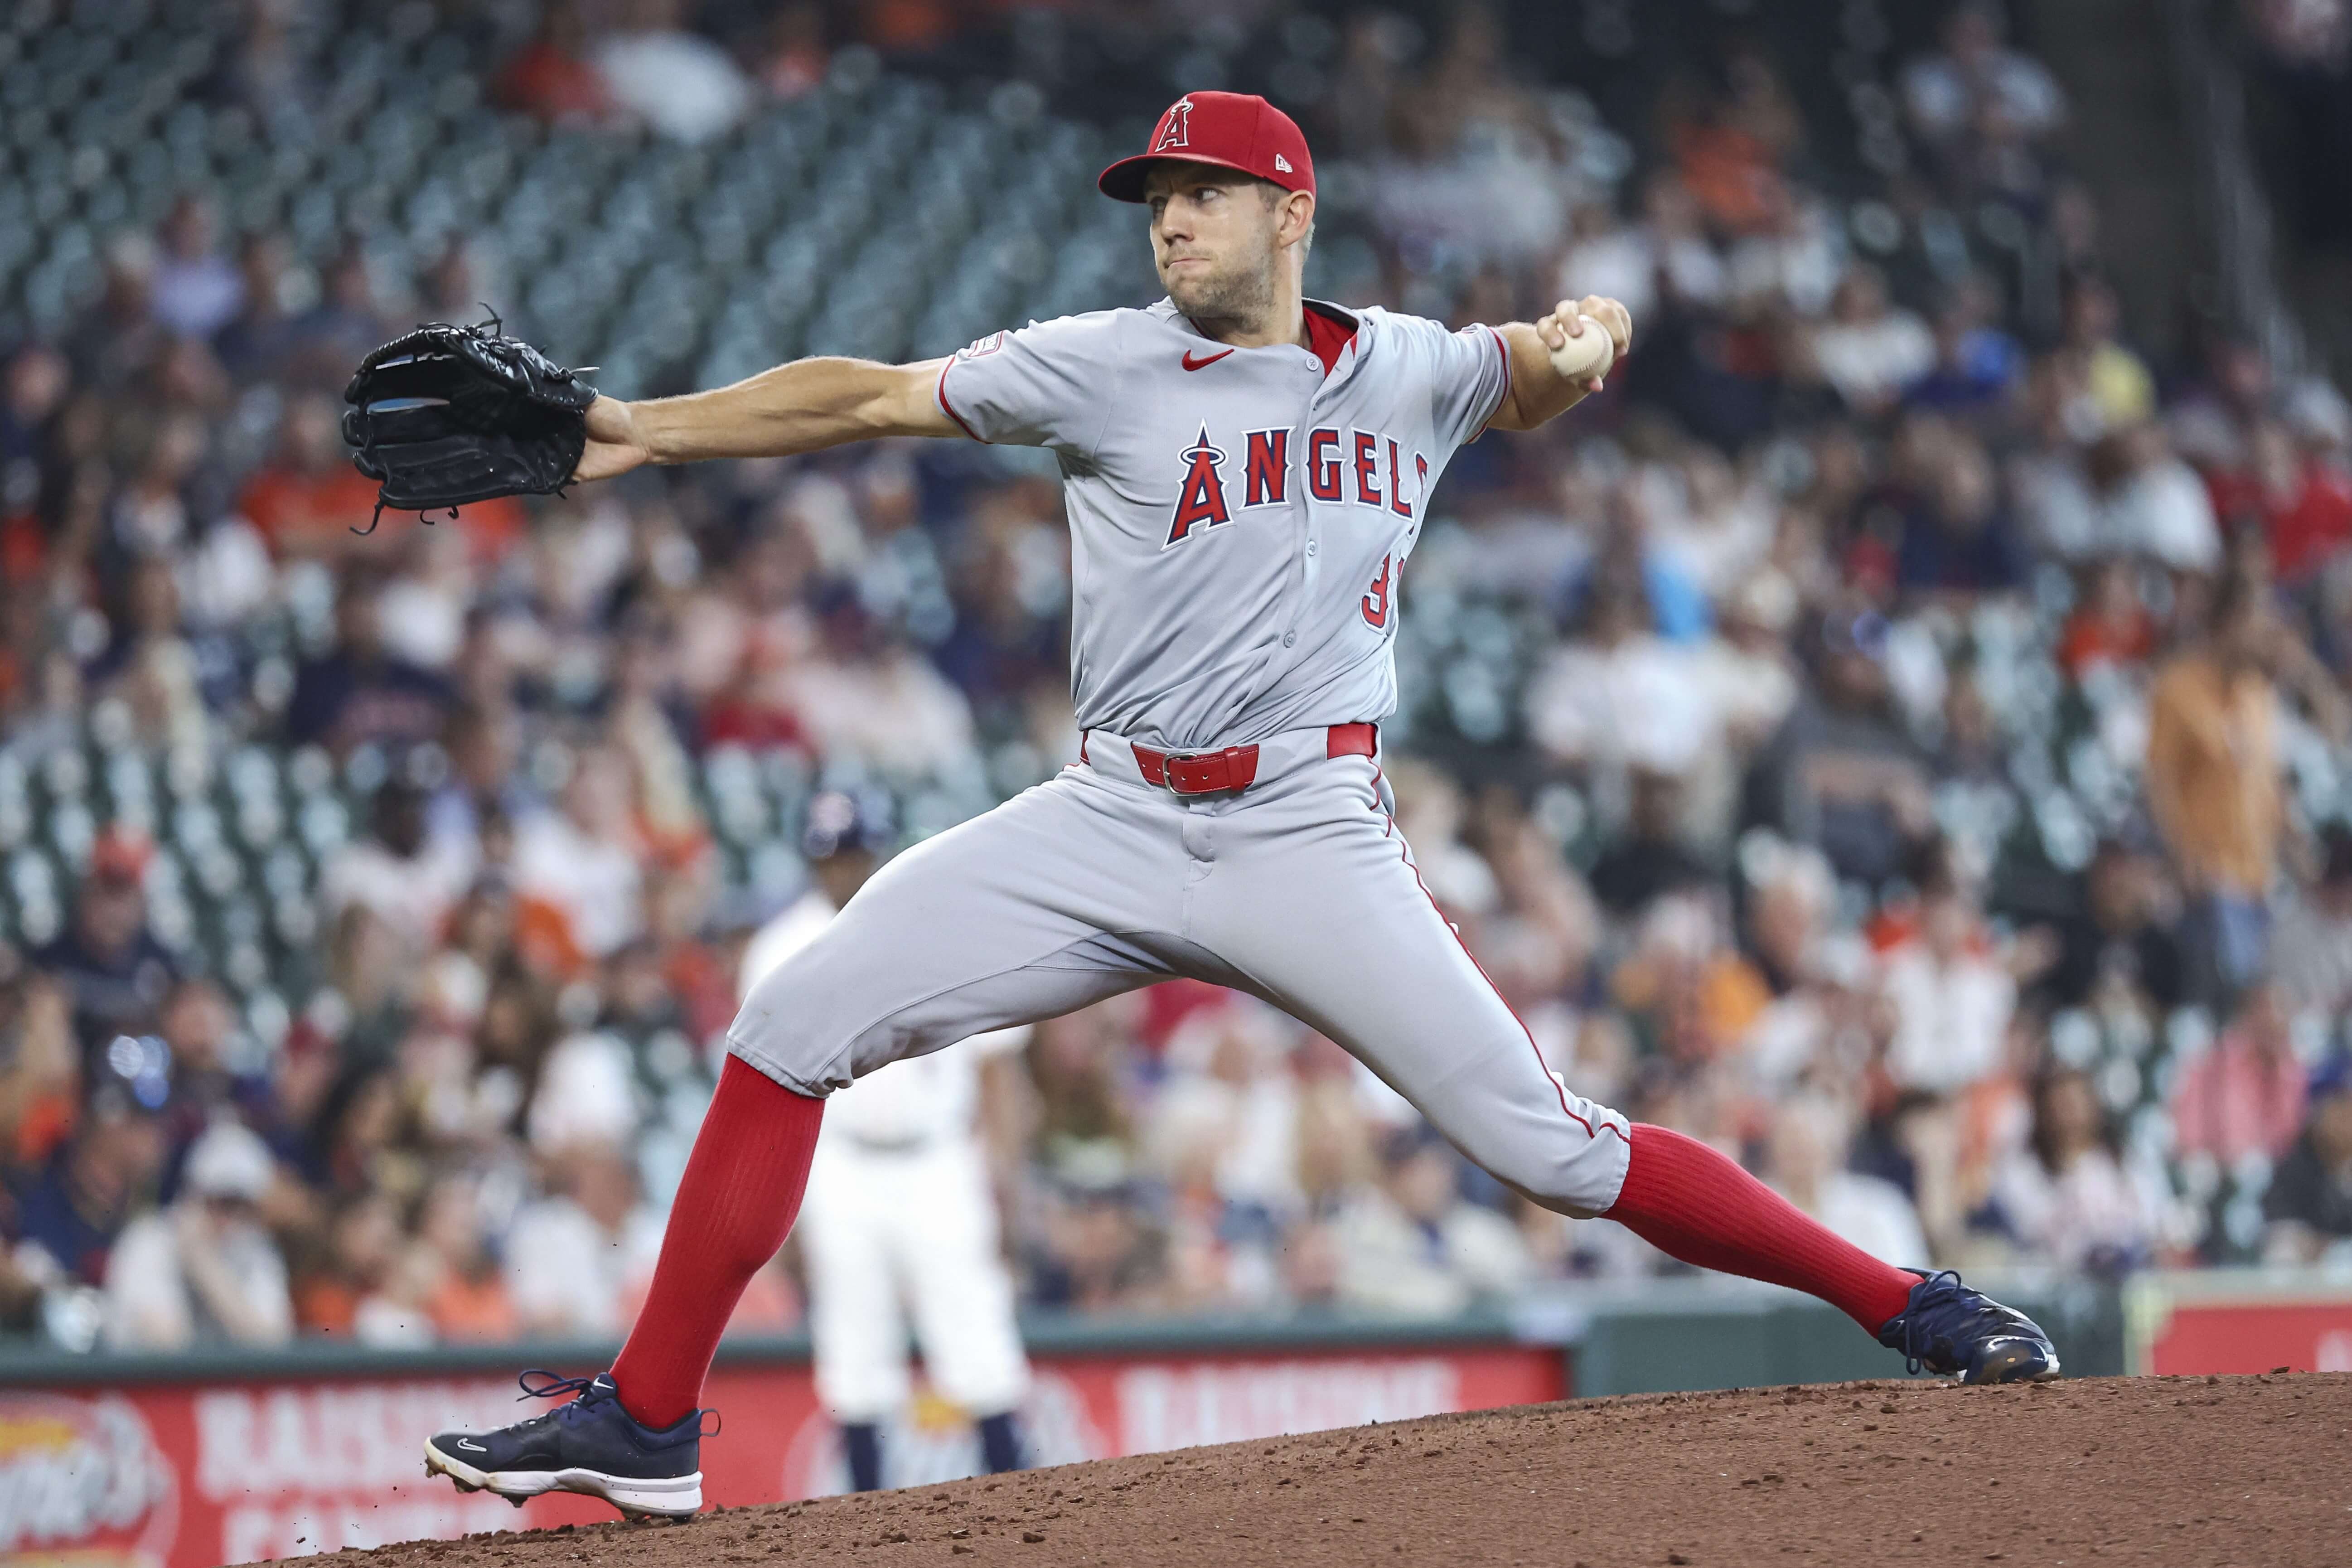 How To Bet - Yankees vs Angels Prediction, Picks, and Odds for Tonight’s MLB Game